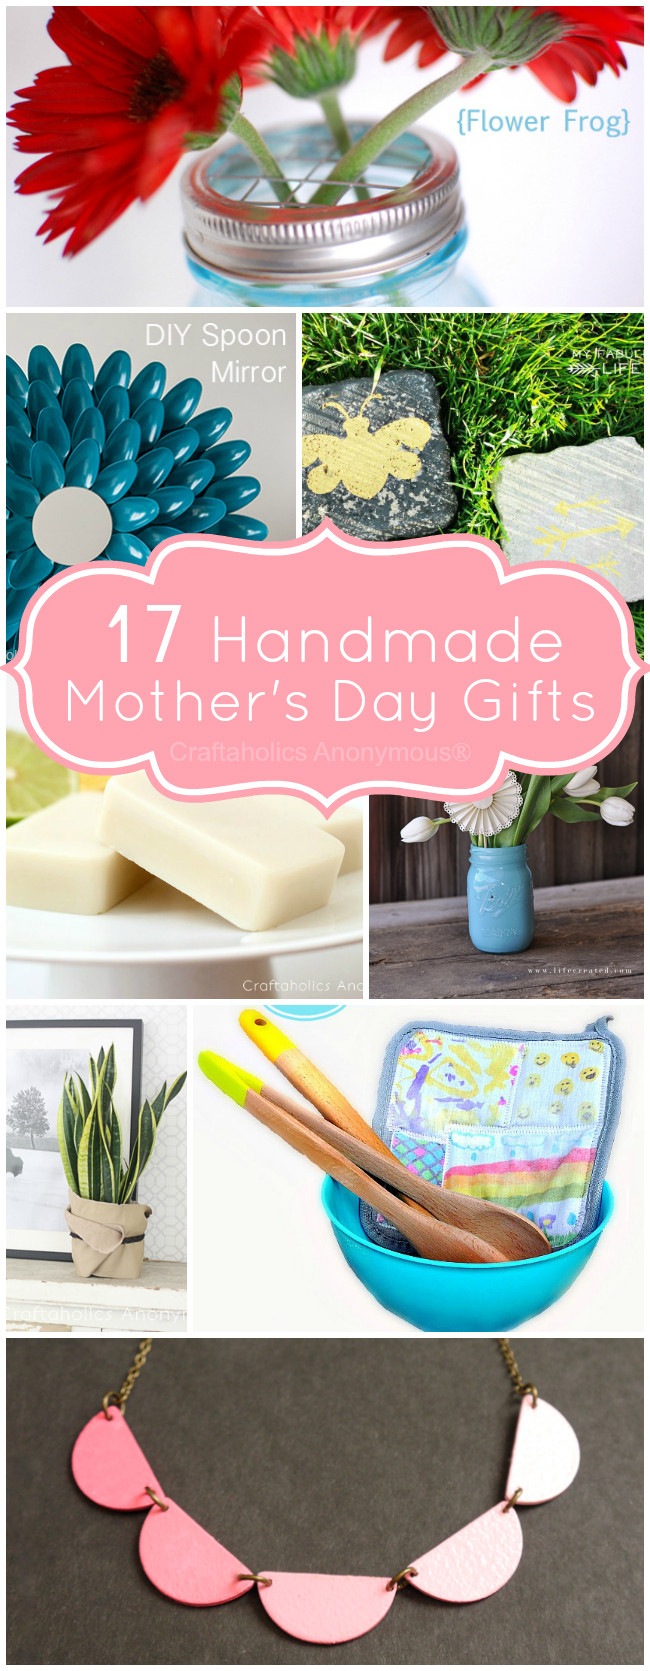 Crafts For Mother's Day
 Craftaholics Anonymous